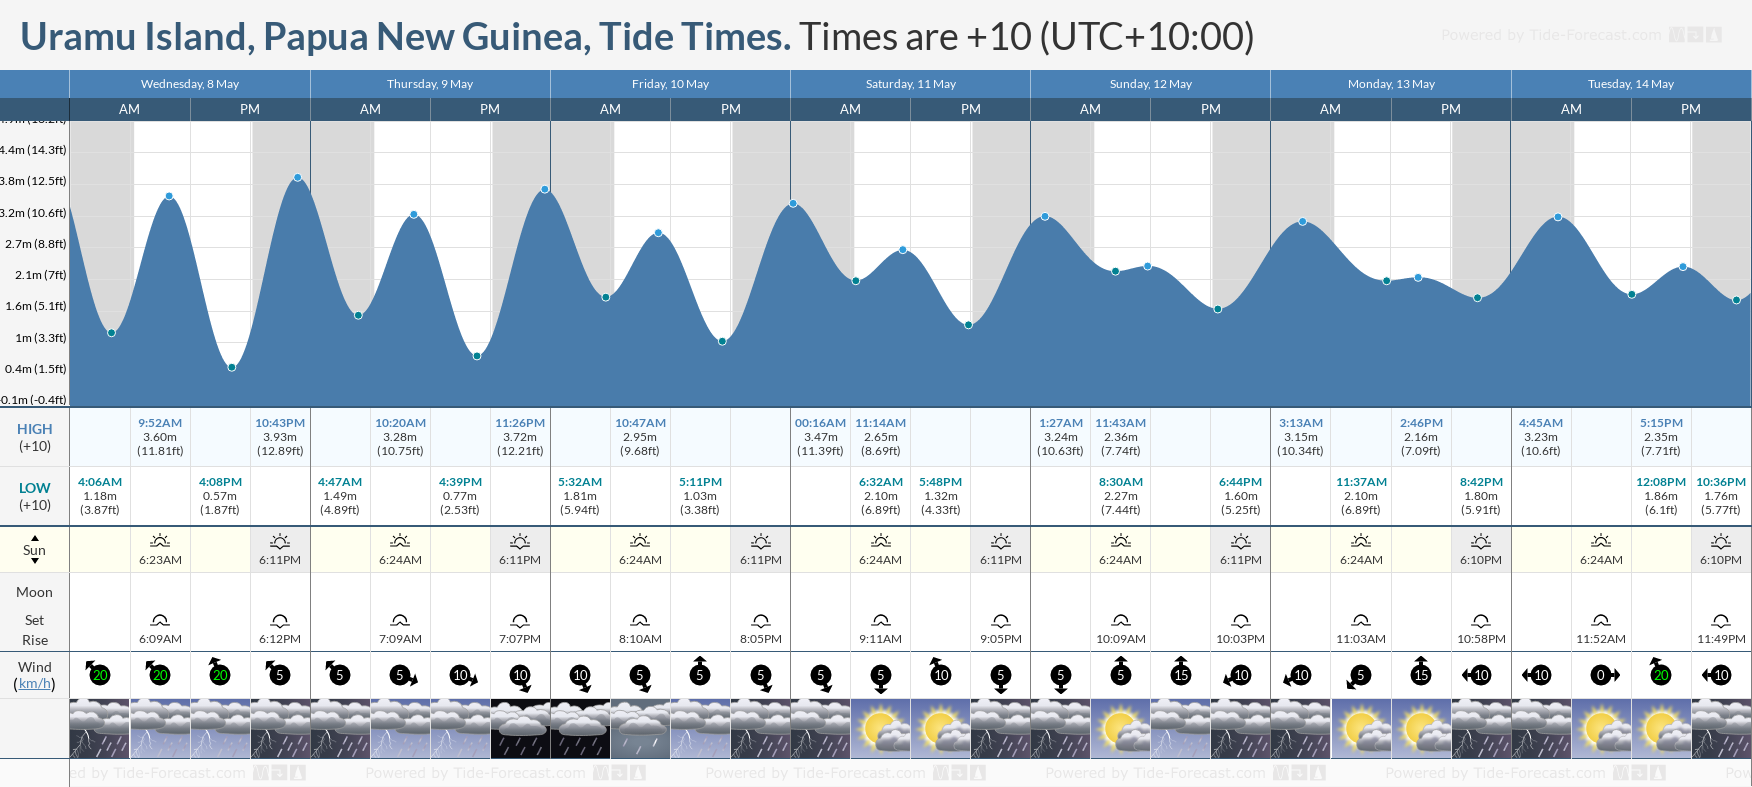 Uramu Island, Papua New Guinea Tide Chart including high and low tide tide times for the next 7 days